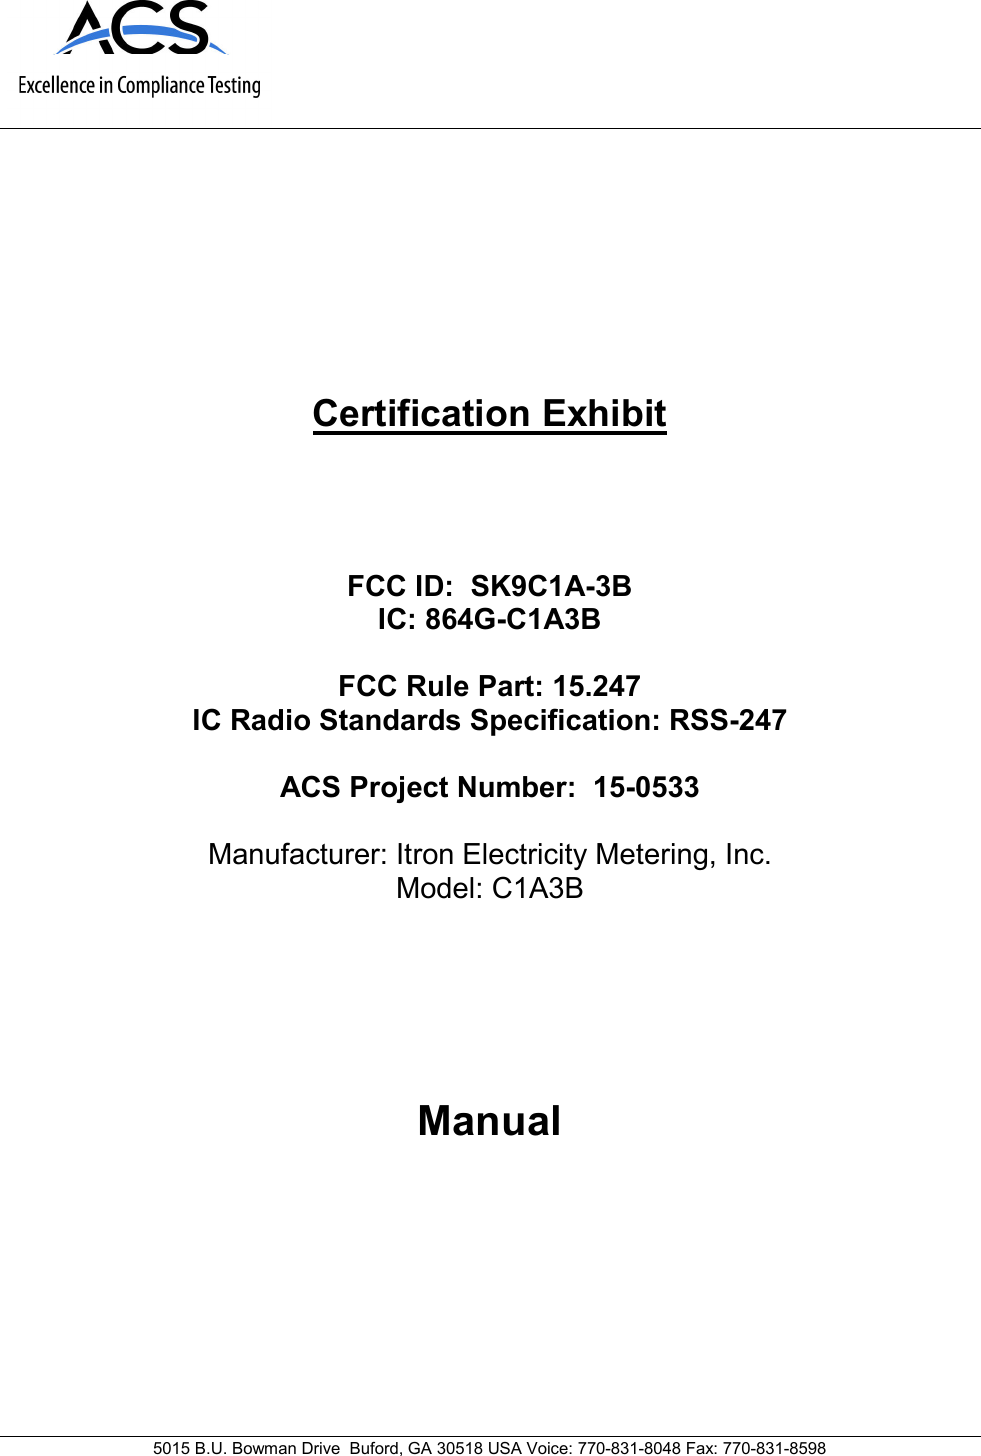      5015 B.U. Bowman Drive  Buford, GA 30518 USA Voice: 770-831-8048 Fax: 770-831-8598   Certification Exhibit     FCC ID:  SK9C1A-3B IC: 864G-C1A3B  FCC Rule Part: 15.247 IC Radio Standards Specification: RSS-247  ACS Project Number:  15-0533   Manufacturer: Itron Electricity Metering, Inc. Model: C1A3B     Manual         